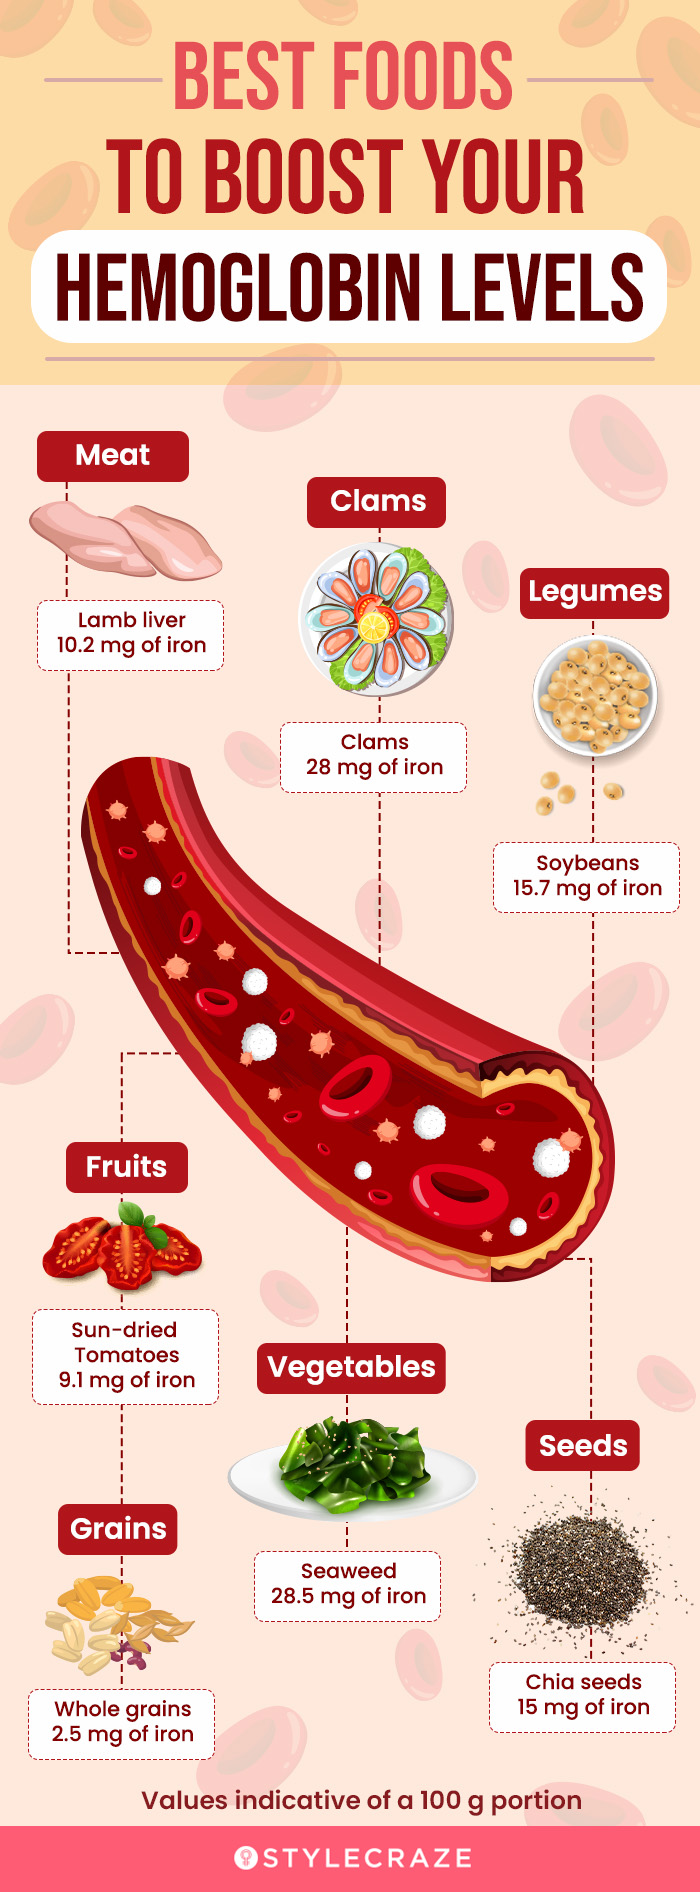 best foods to boost your hemoglobin levels (infographic)